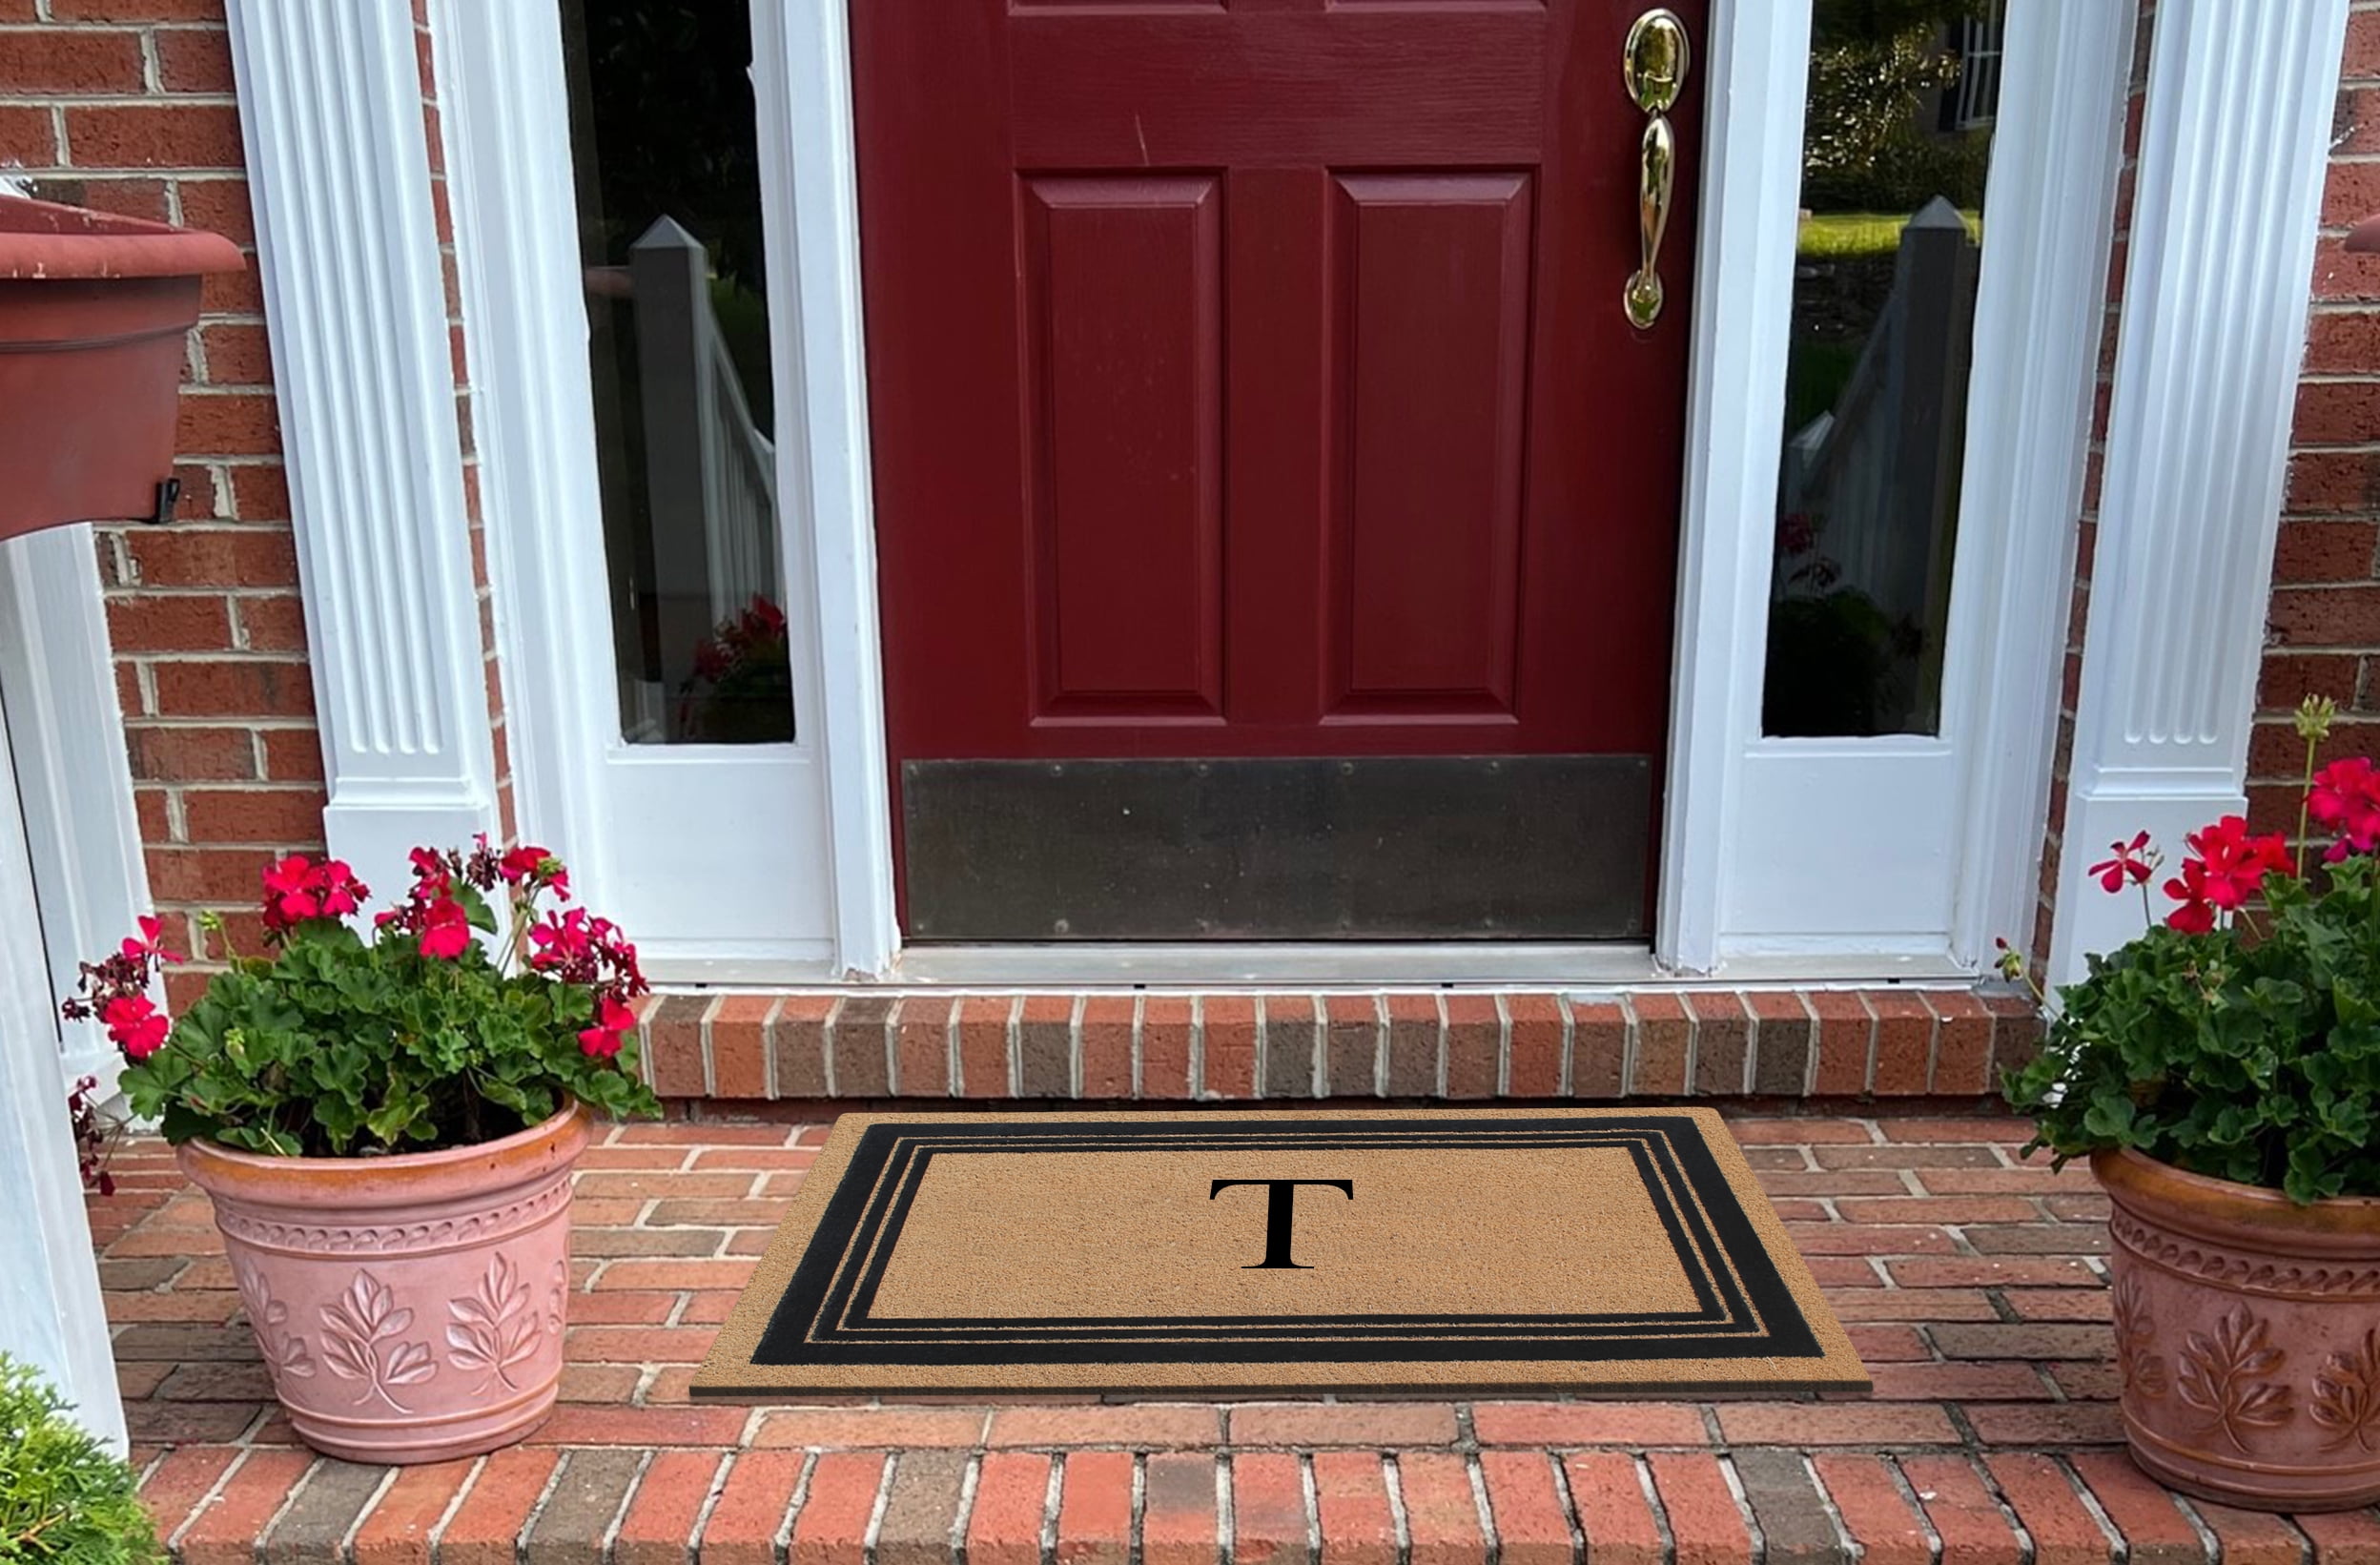 A1 Home Collections A1hc Heavy Weight Beige 24 in. x 48 in. Rubber and Coir Large Outdoor Durable Monogrammed B Door Mat